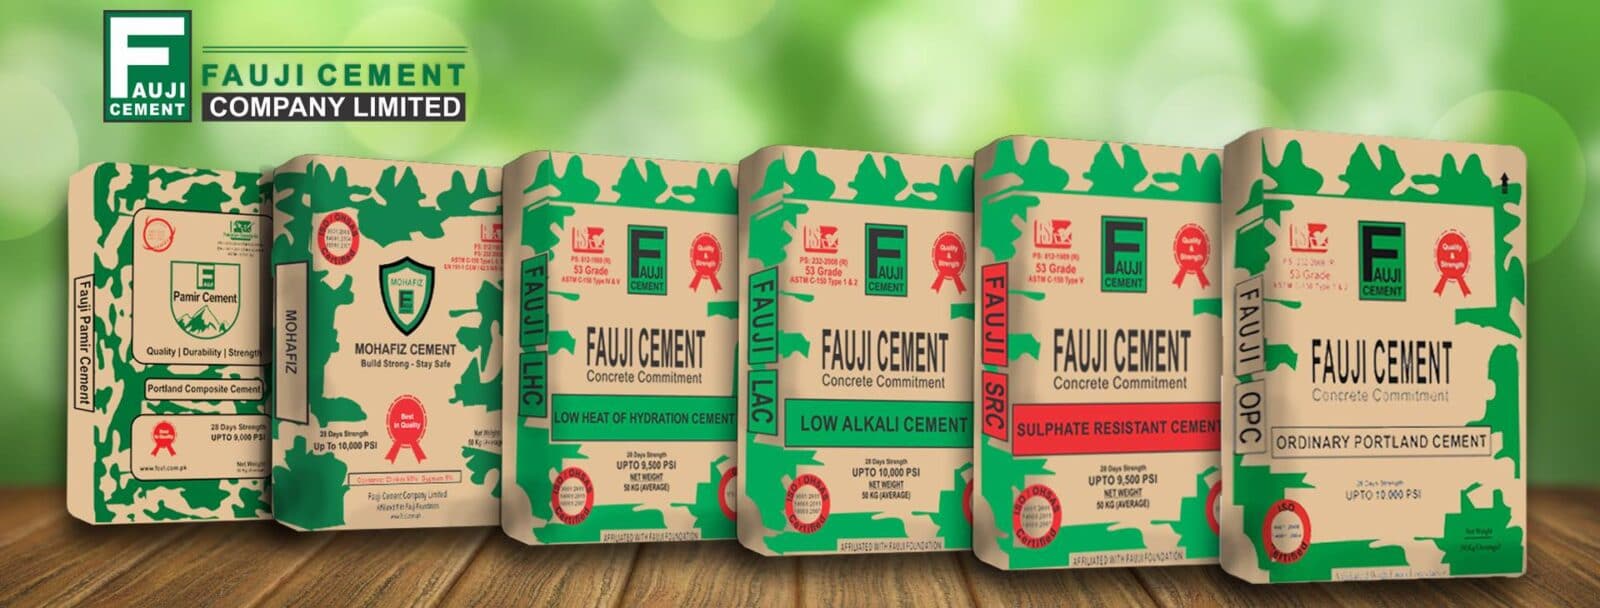 Fauji Cement Reports a Loss for the First Time in More Than a Decade